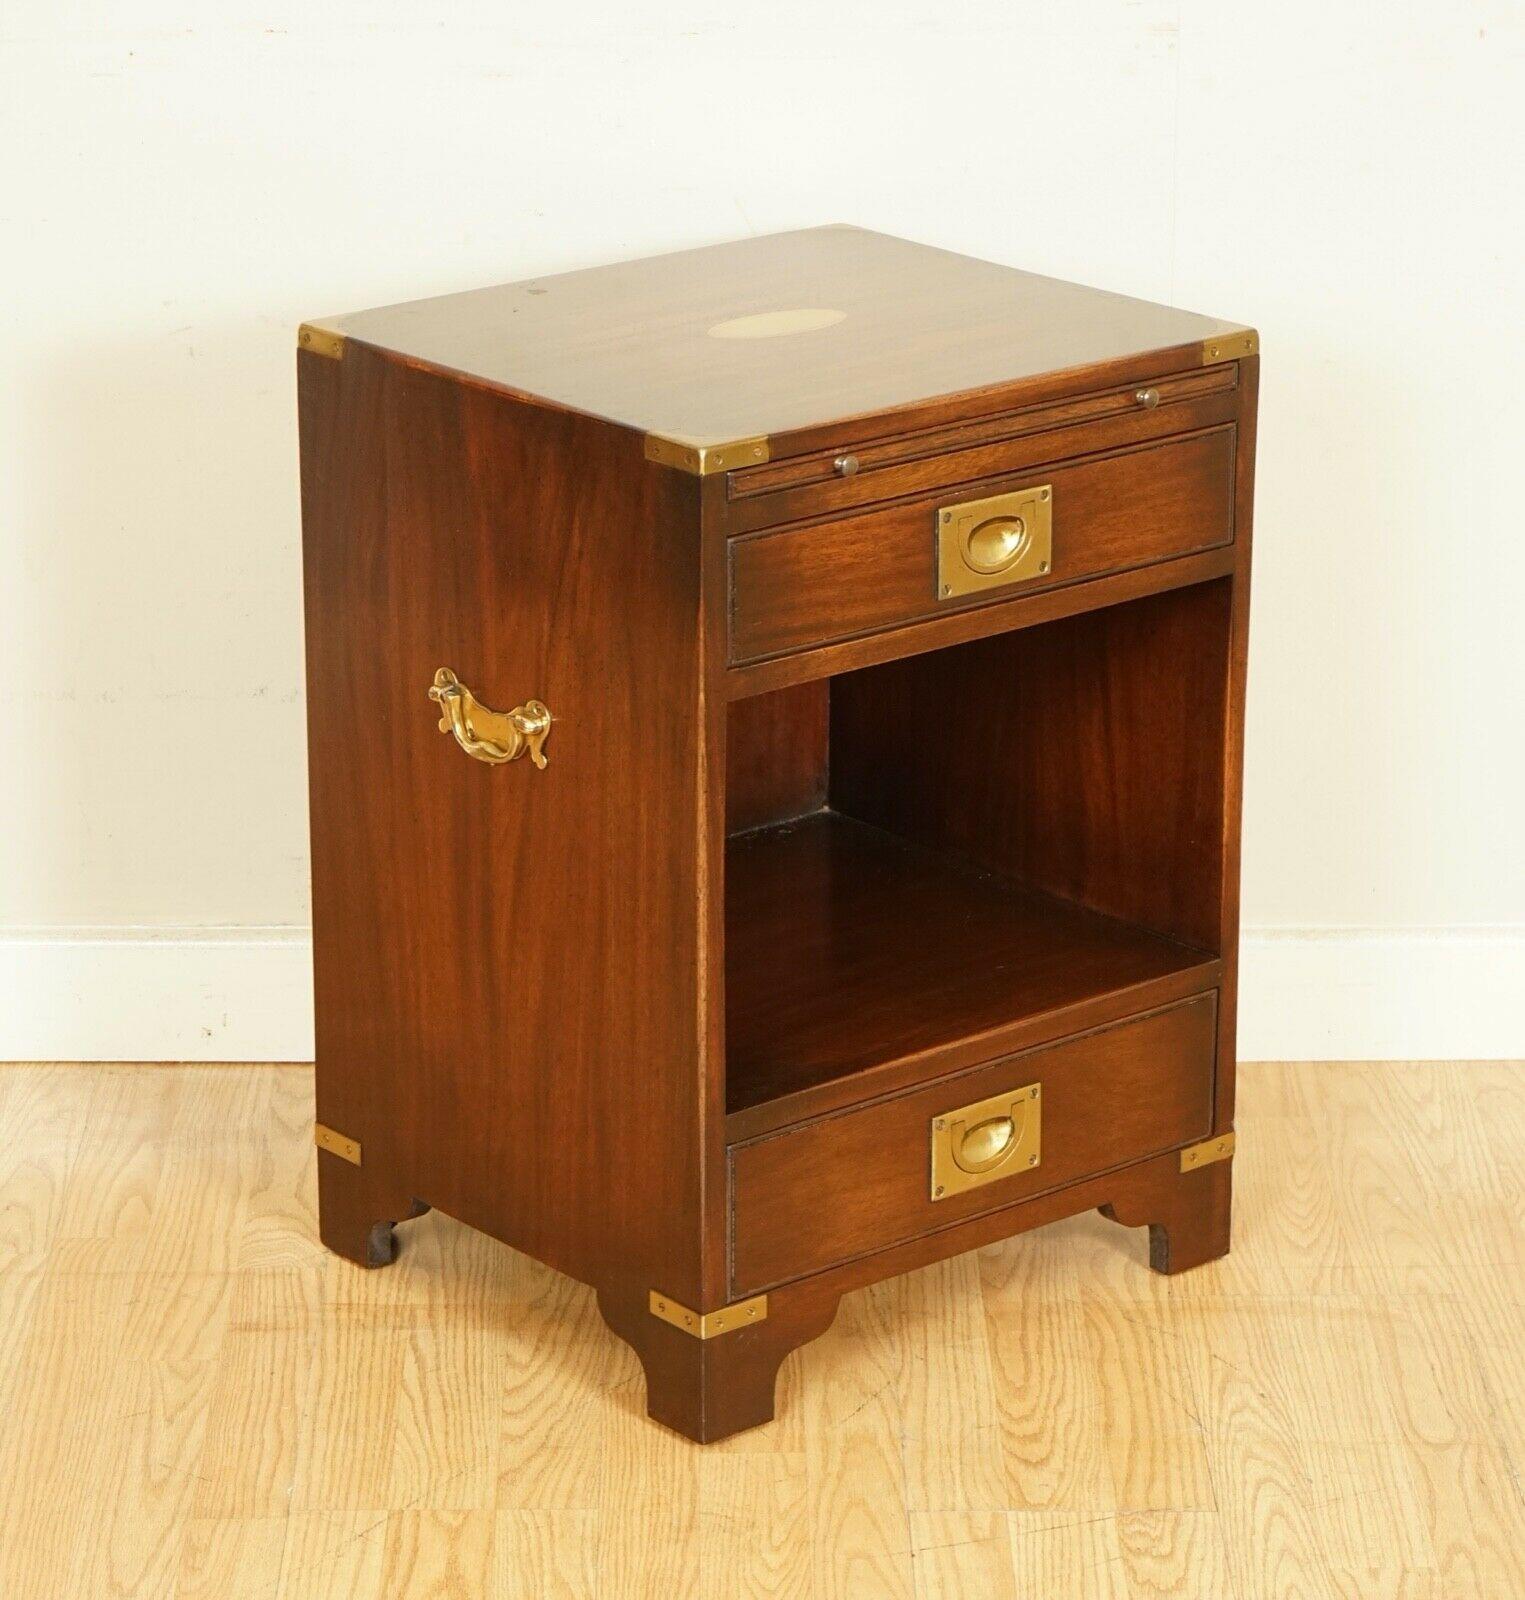 We are so excited to present to you this outstanding vintage Military campaign Mahogany bedside table.

A very well made and solid piece of furniture, highly desirable as the years go by Campaign furniture only gets more popular over the years.